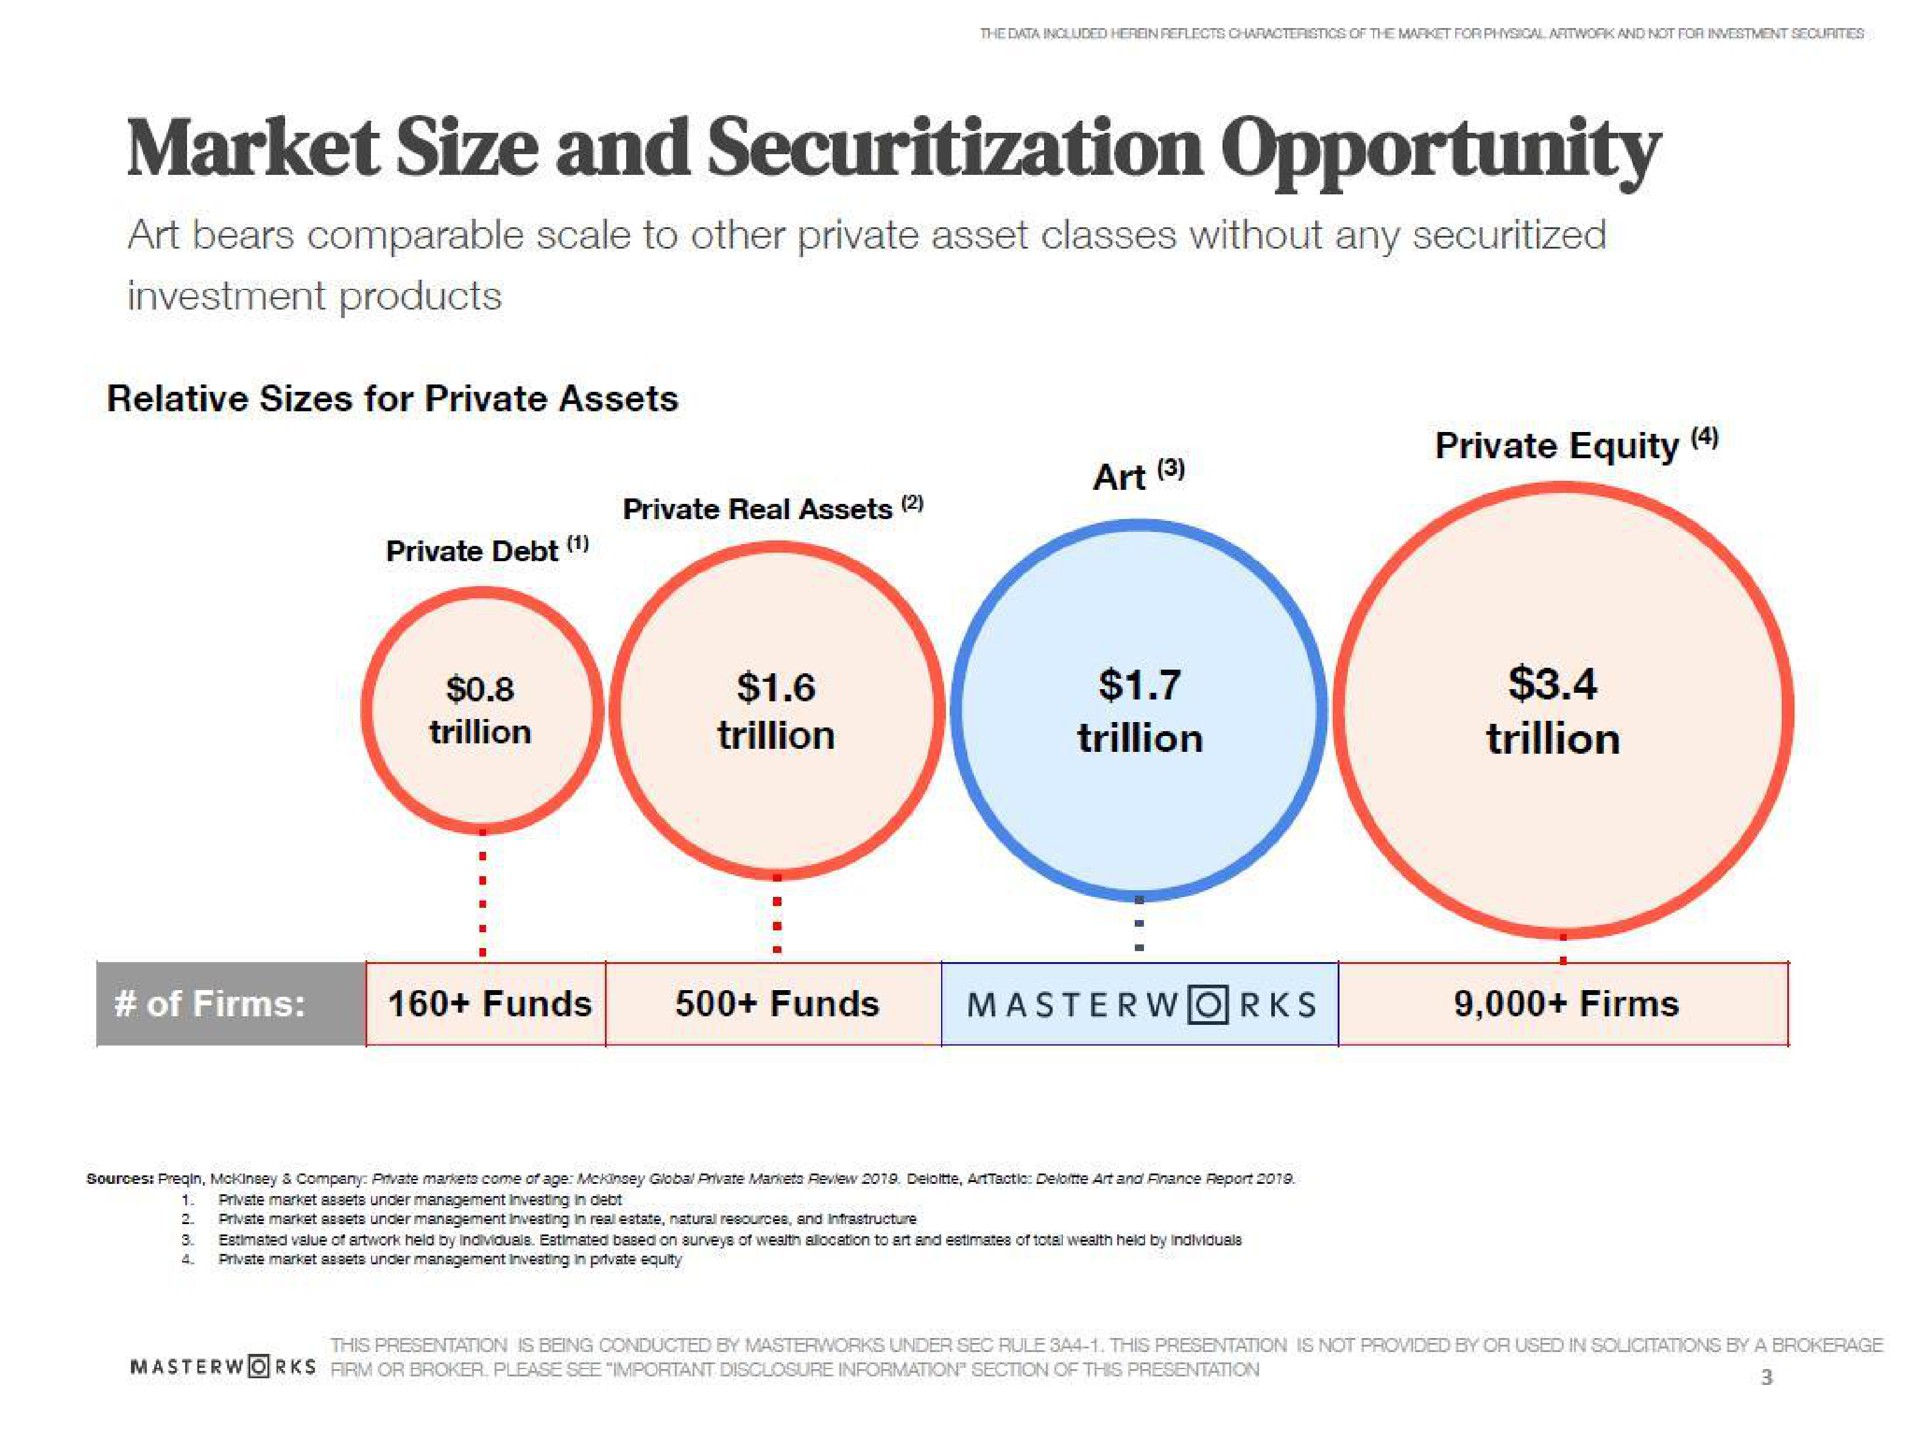 market size and opportunity art bears comparable scale to other private asset classes without any investment products art private equity trillion trillion trillion | Masterworks